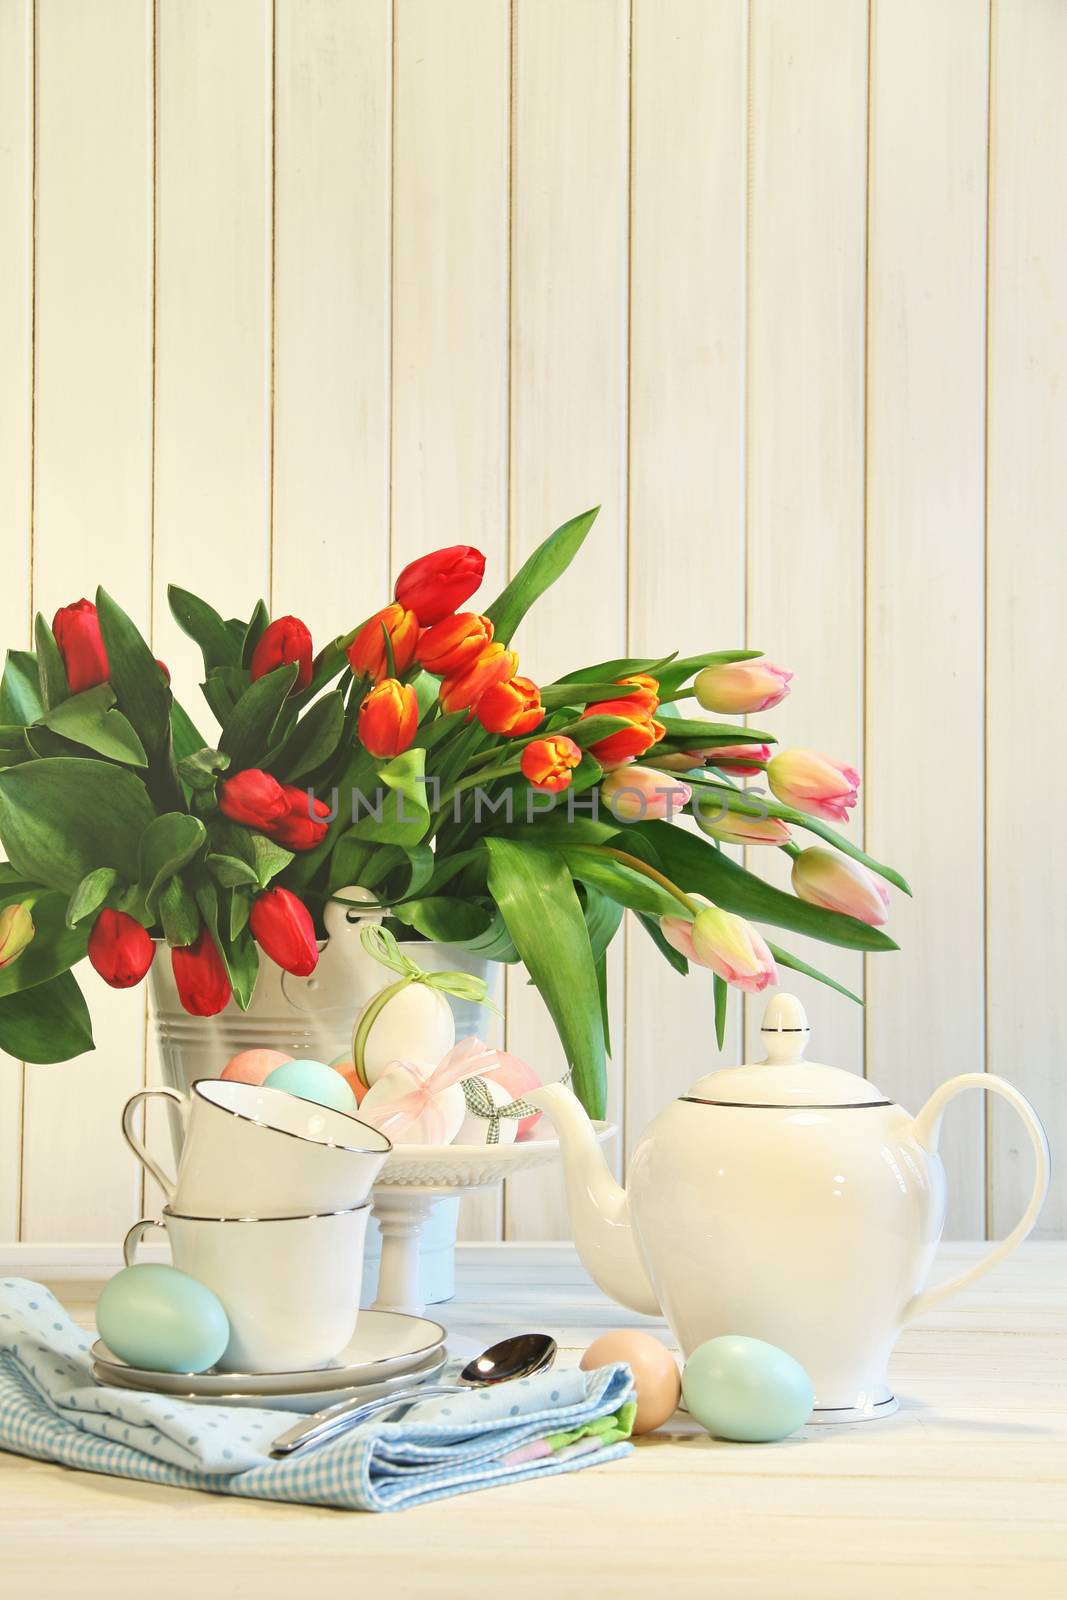 Tulips and colored Easter eggs by Sandralise